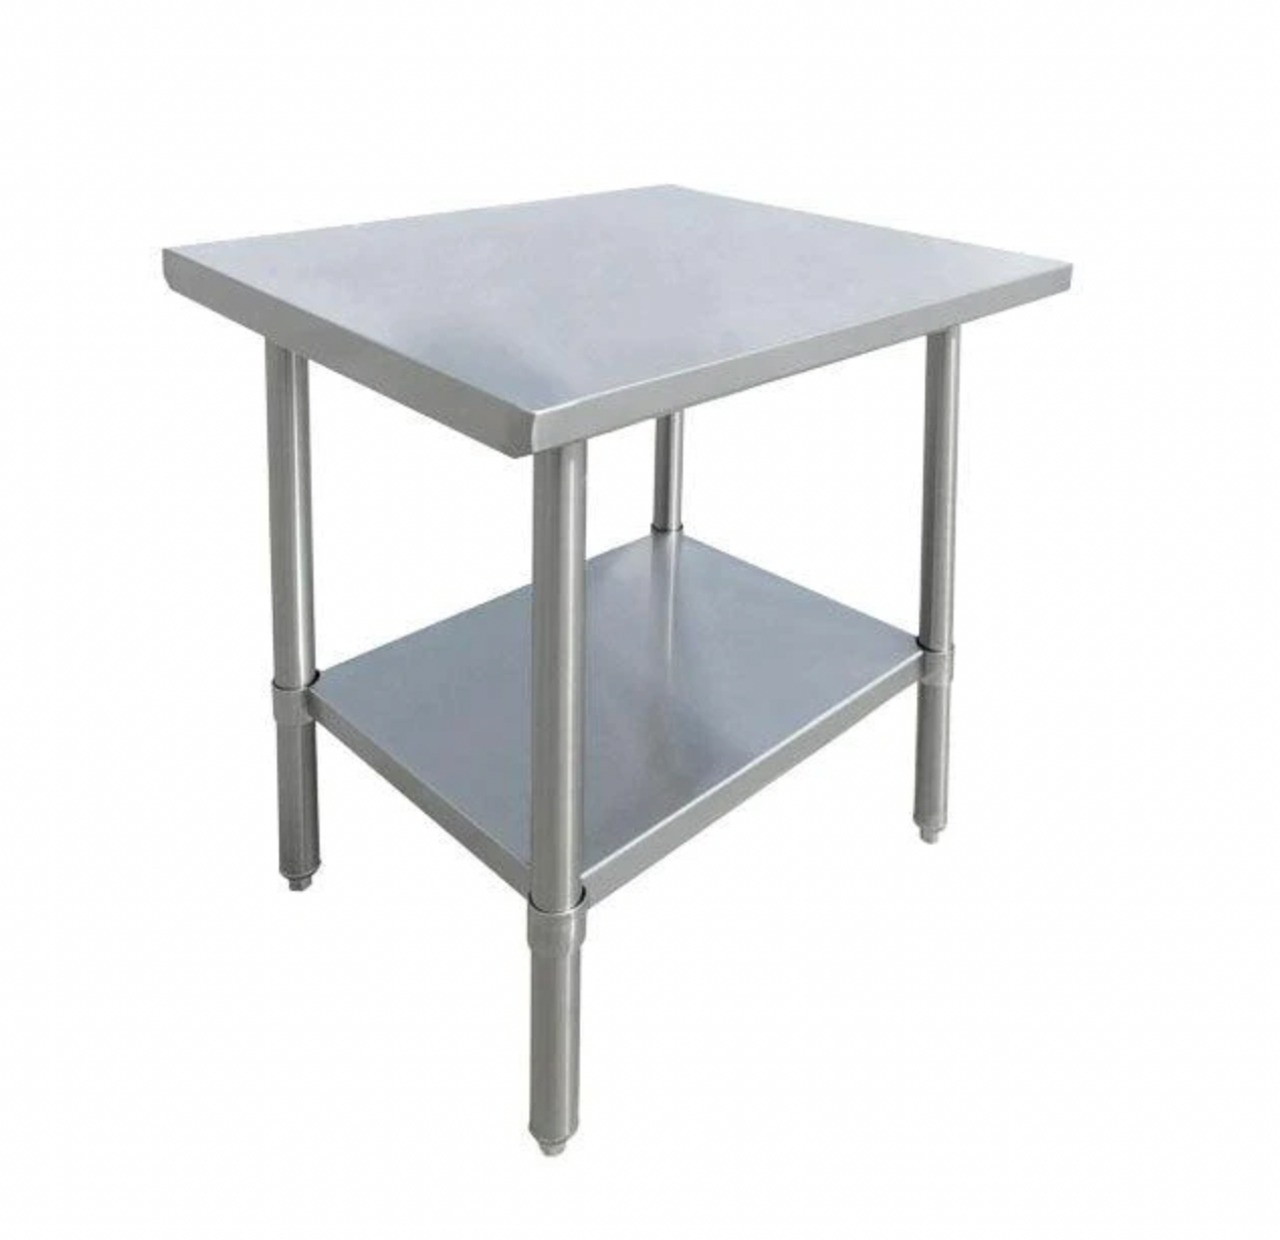 24" x 24" All Stainless Steel Table